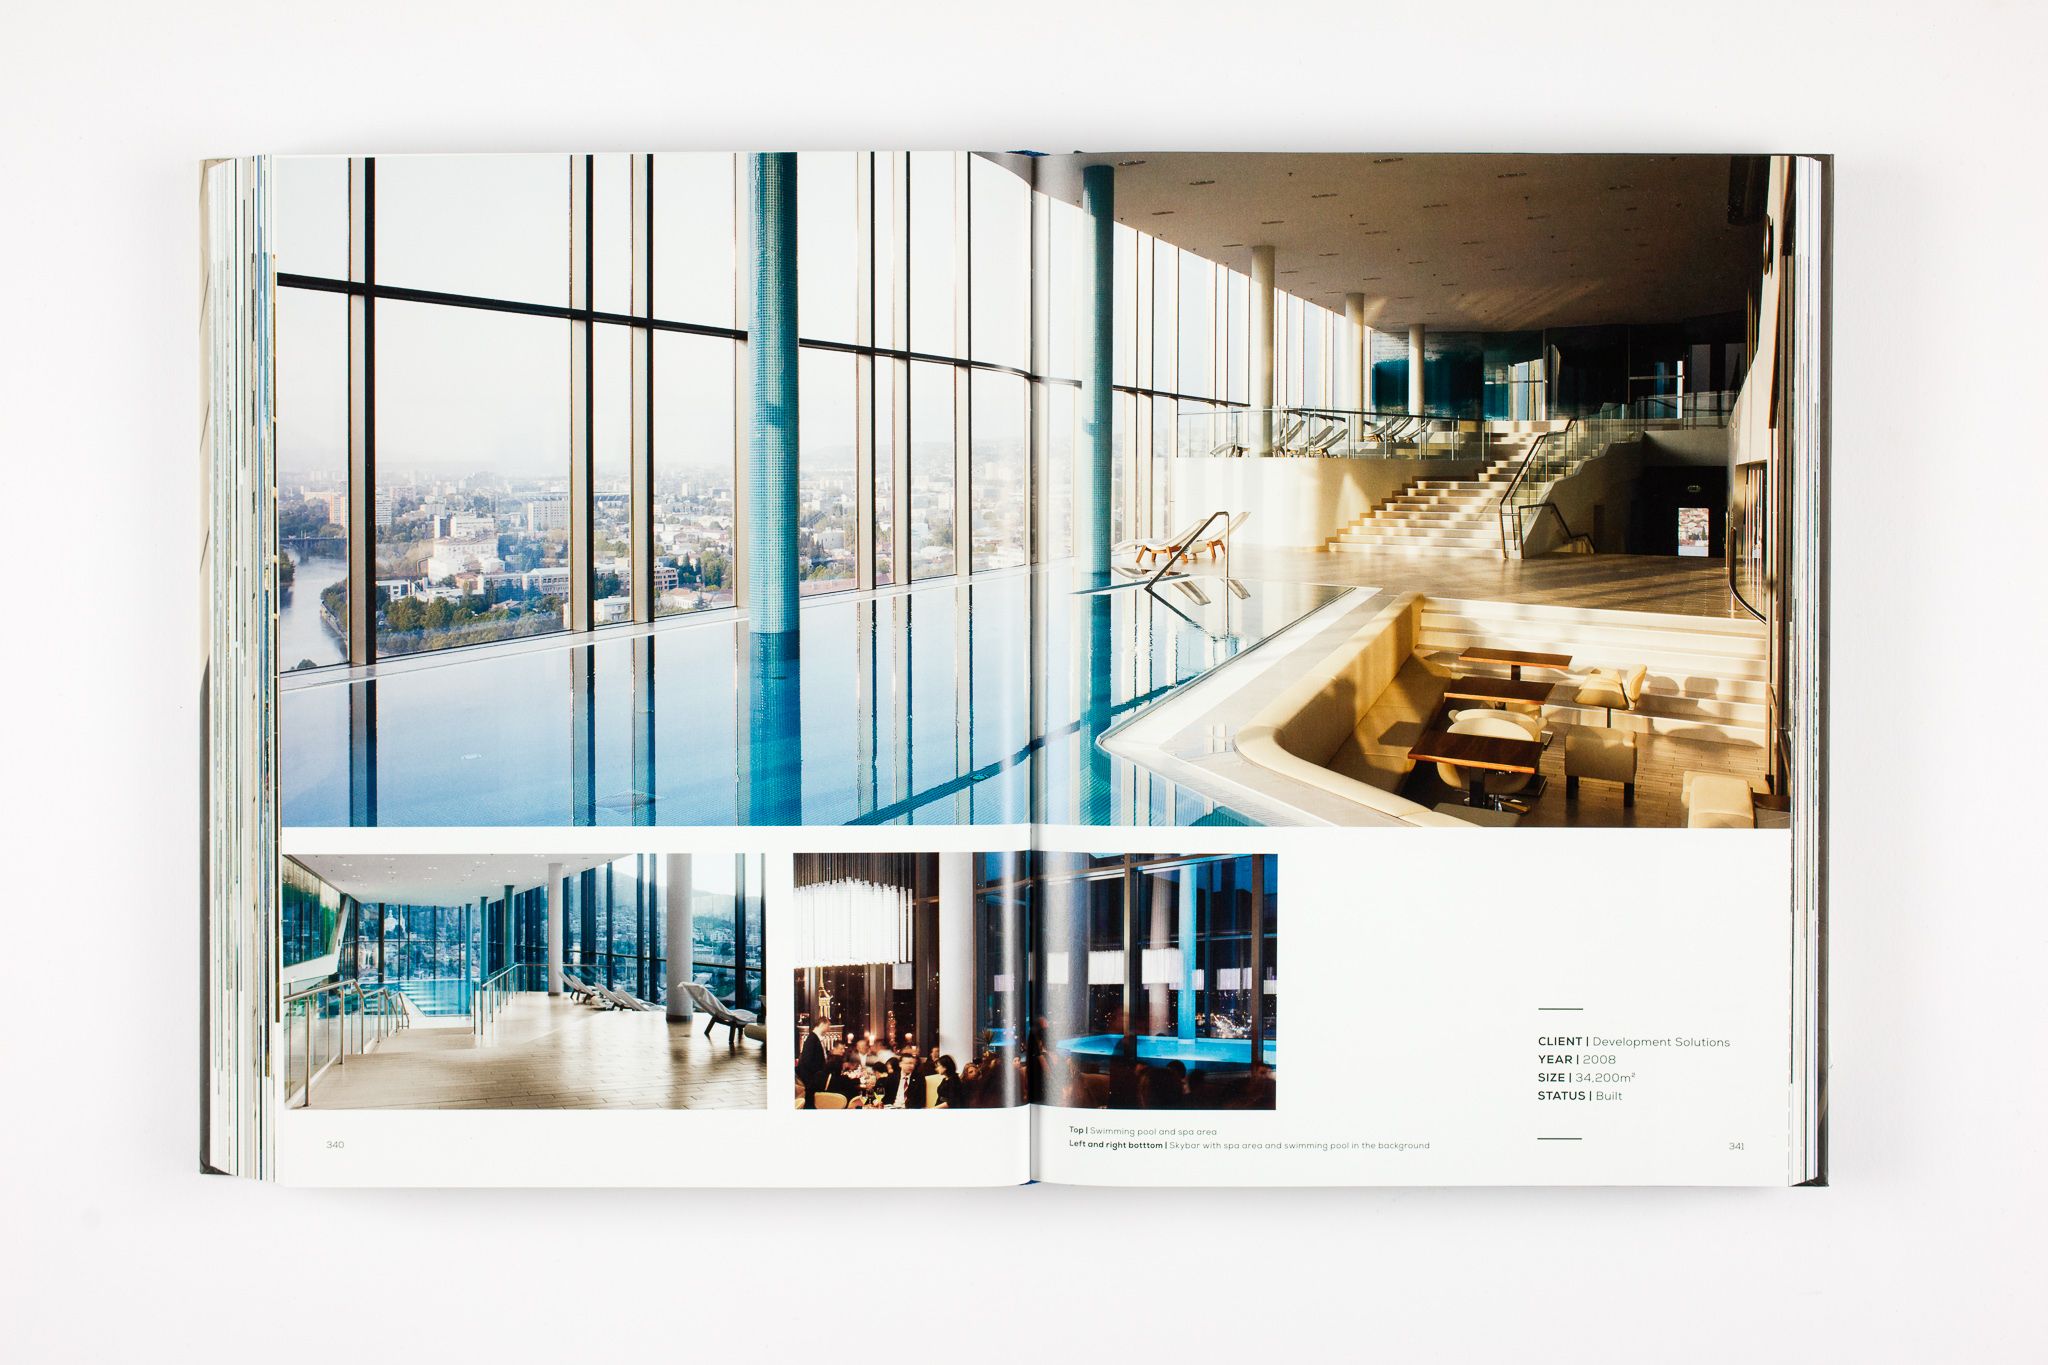 Renowned publishing house Birkhaeuser de Gruyter presents the monograph GRAFT Home. Story. that shows a comprehensive overview of the firm’s work in the field of housing and hospitality.